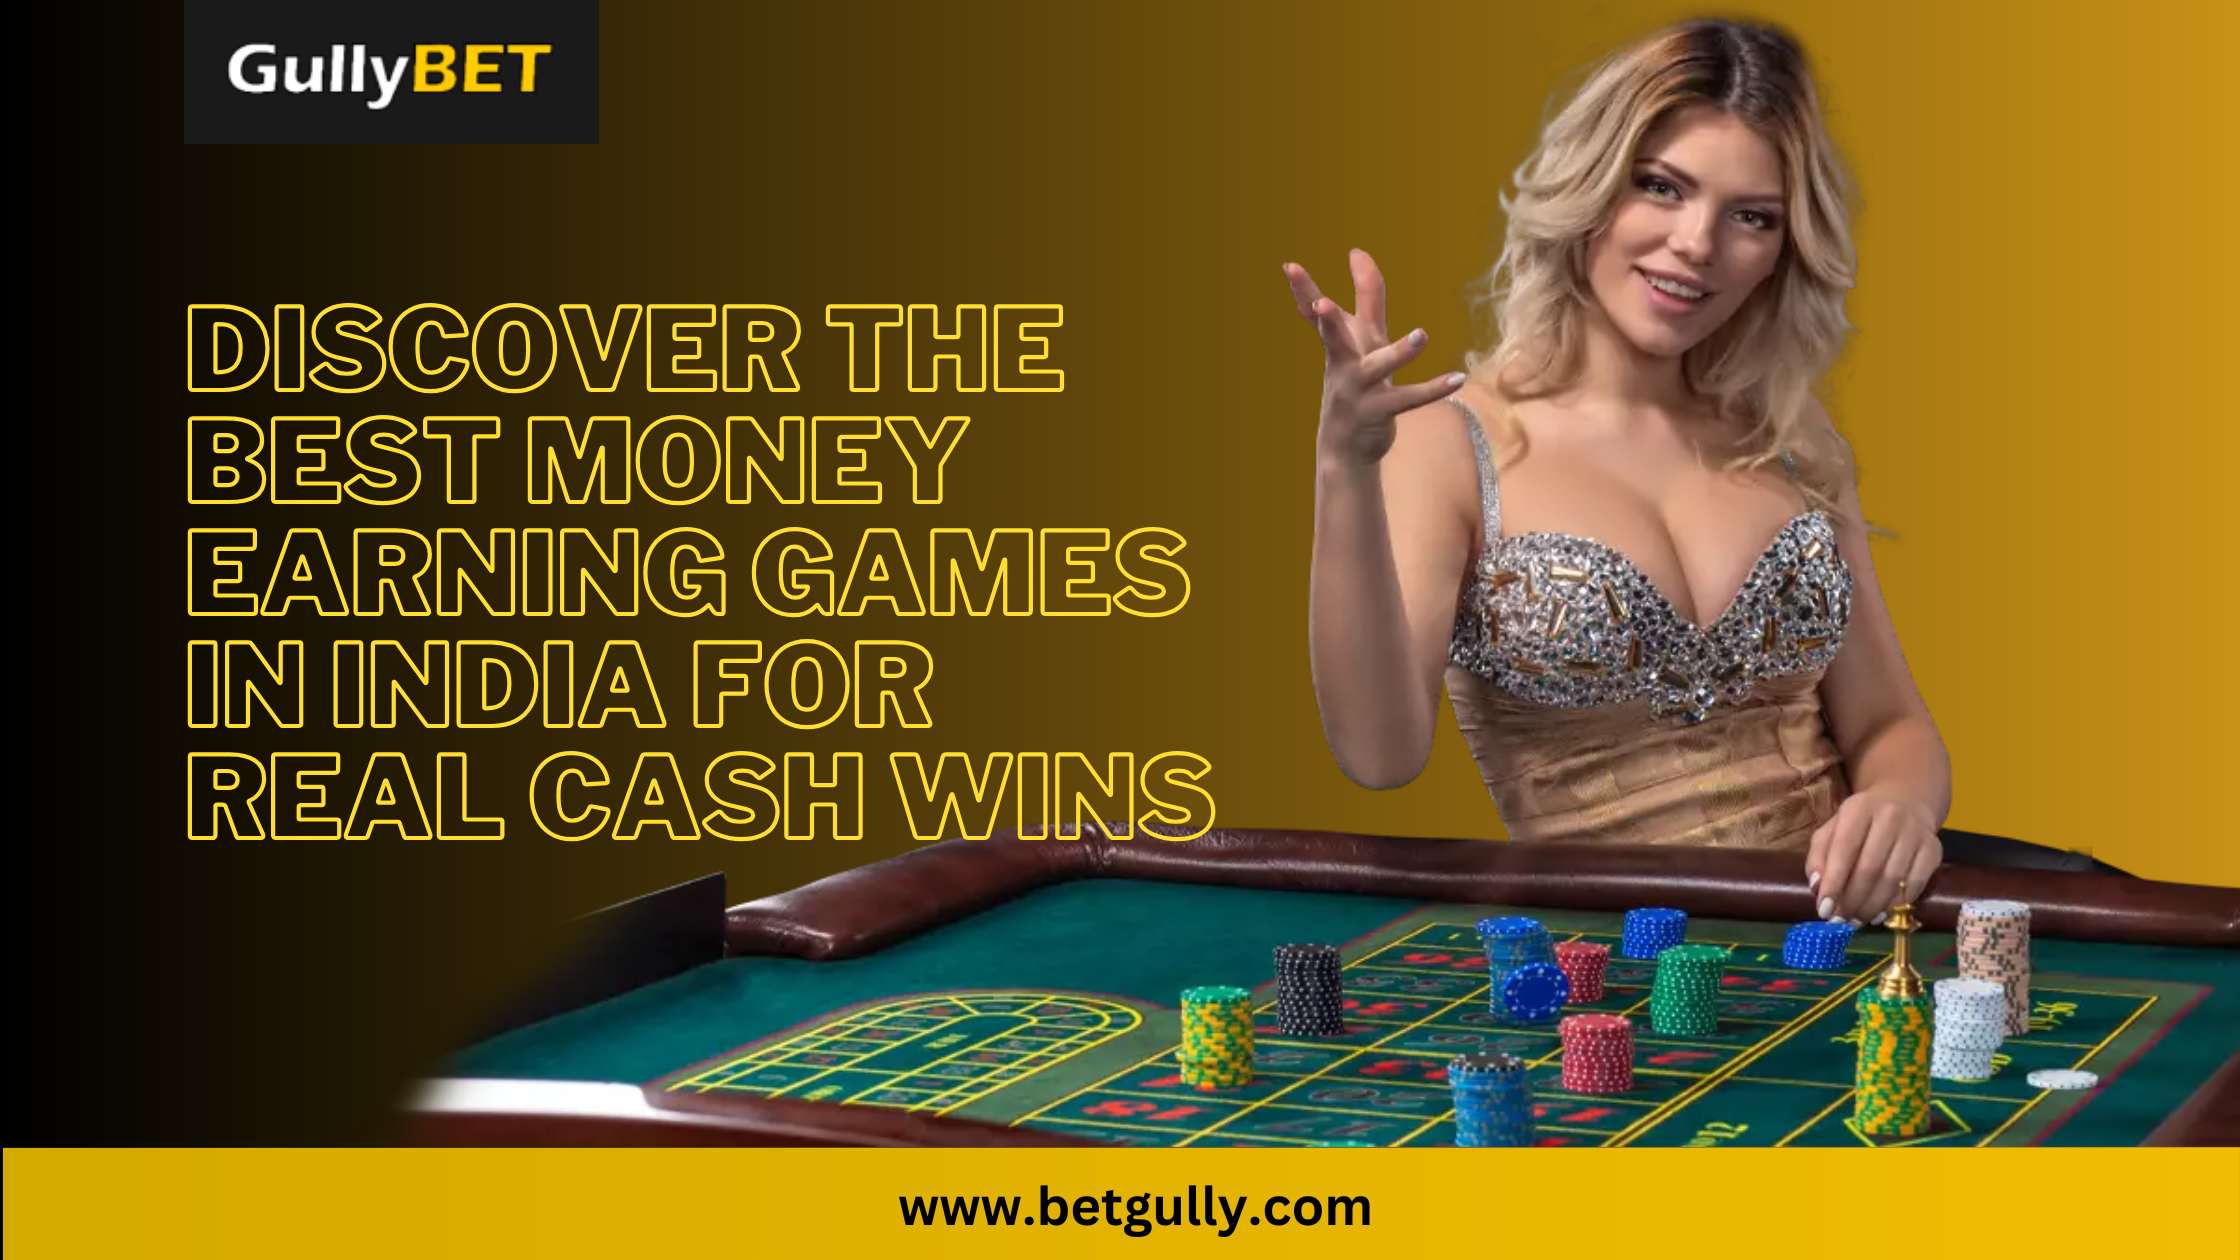 Discover the Best Money Earning Games in India for Real Cash Wins